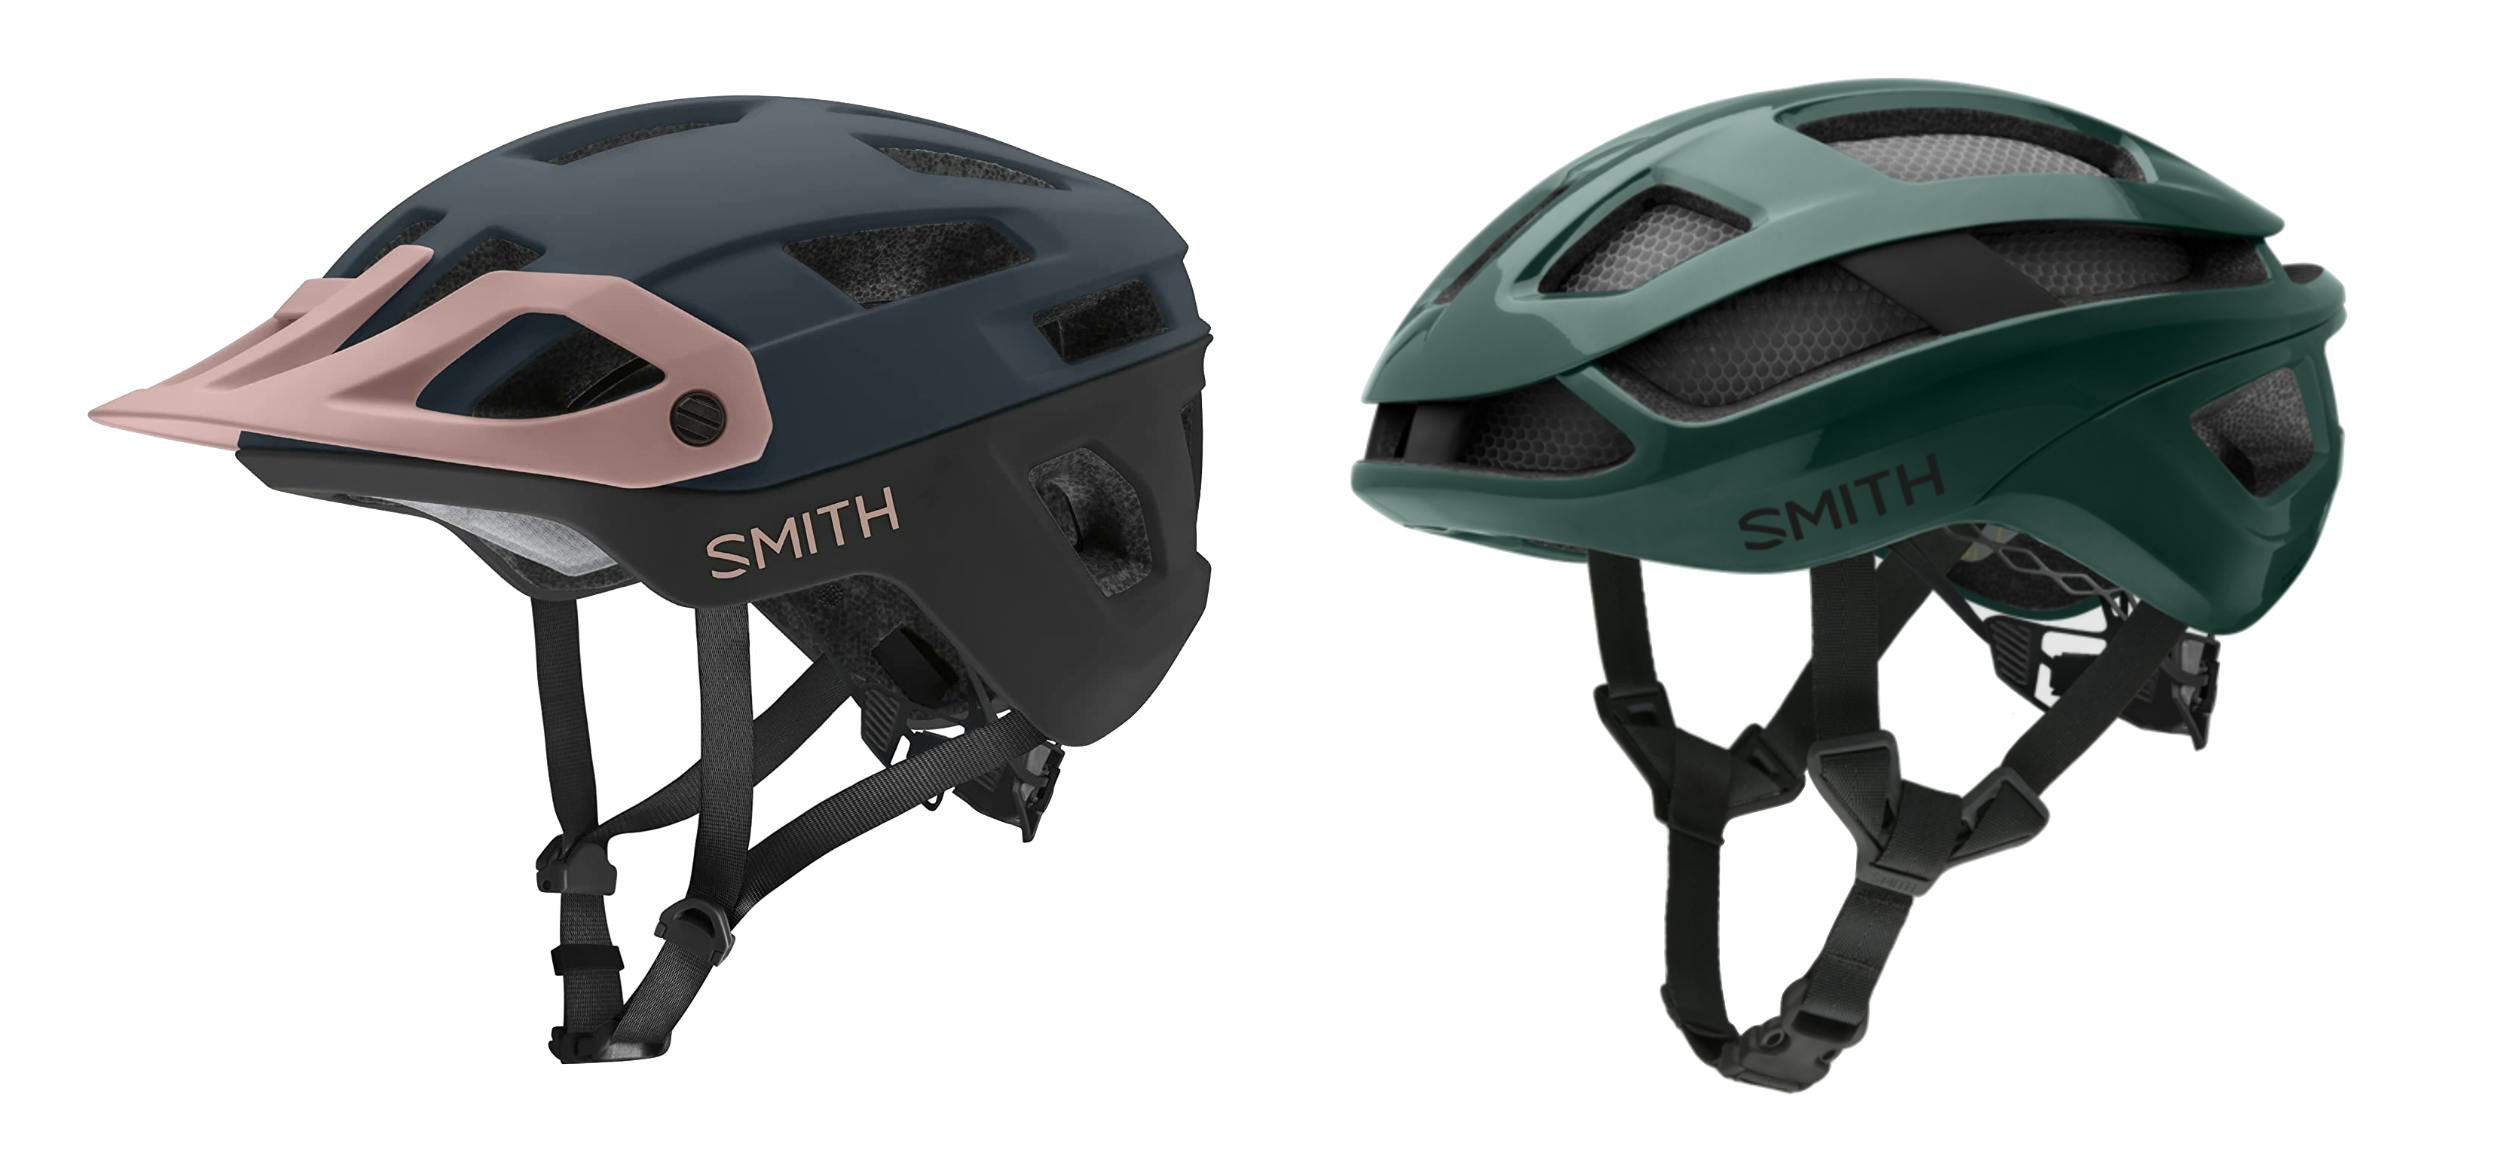 Product images of the Smith Session MIPS Mountain Bike Helmet and the Smith Trace MIPS Road Bike Helmet.